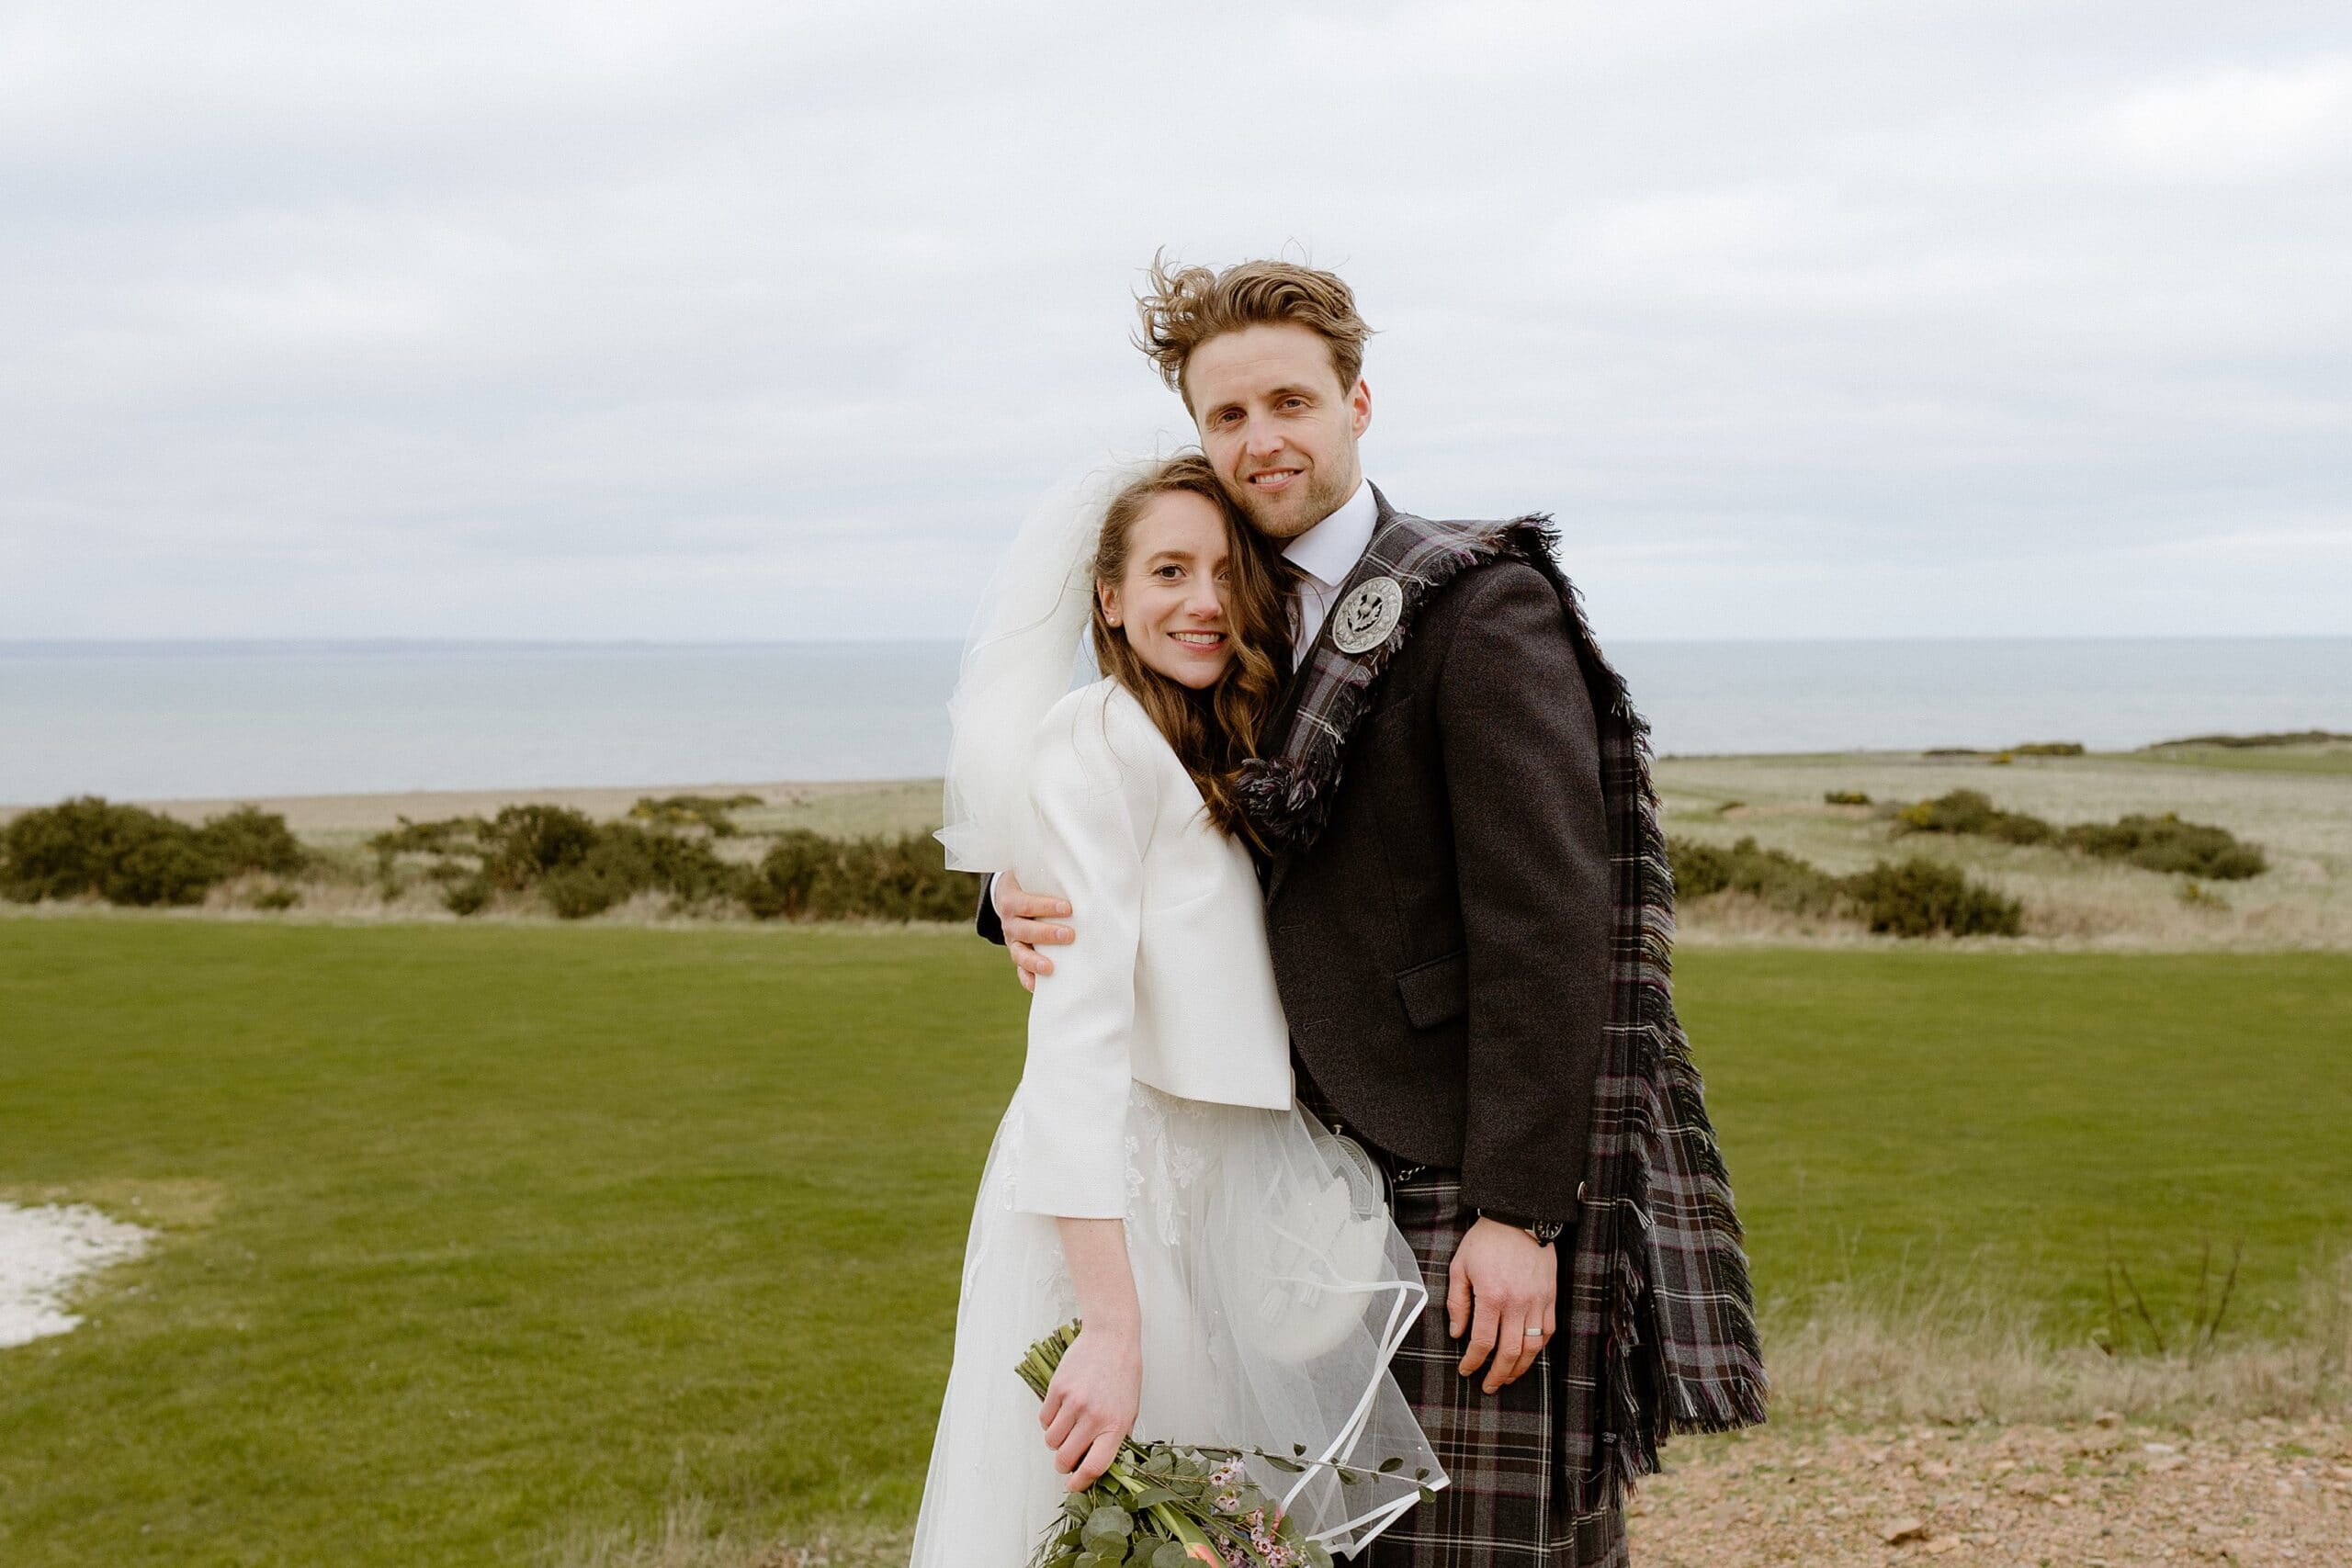 st andrews wedding photographer captures the groom with his arm around the bride outside their barn wedding venue in scotland with the sea in the background